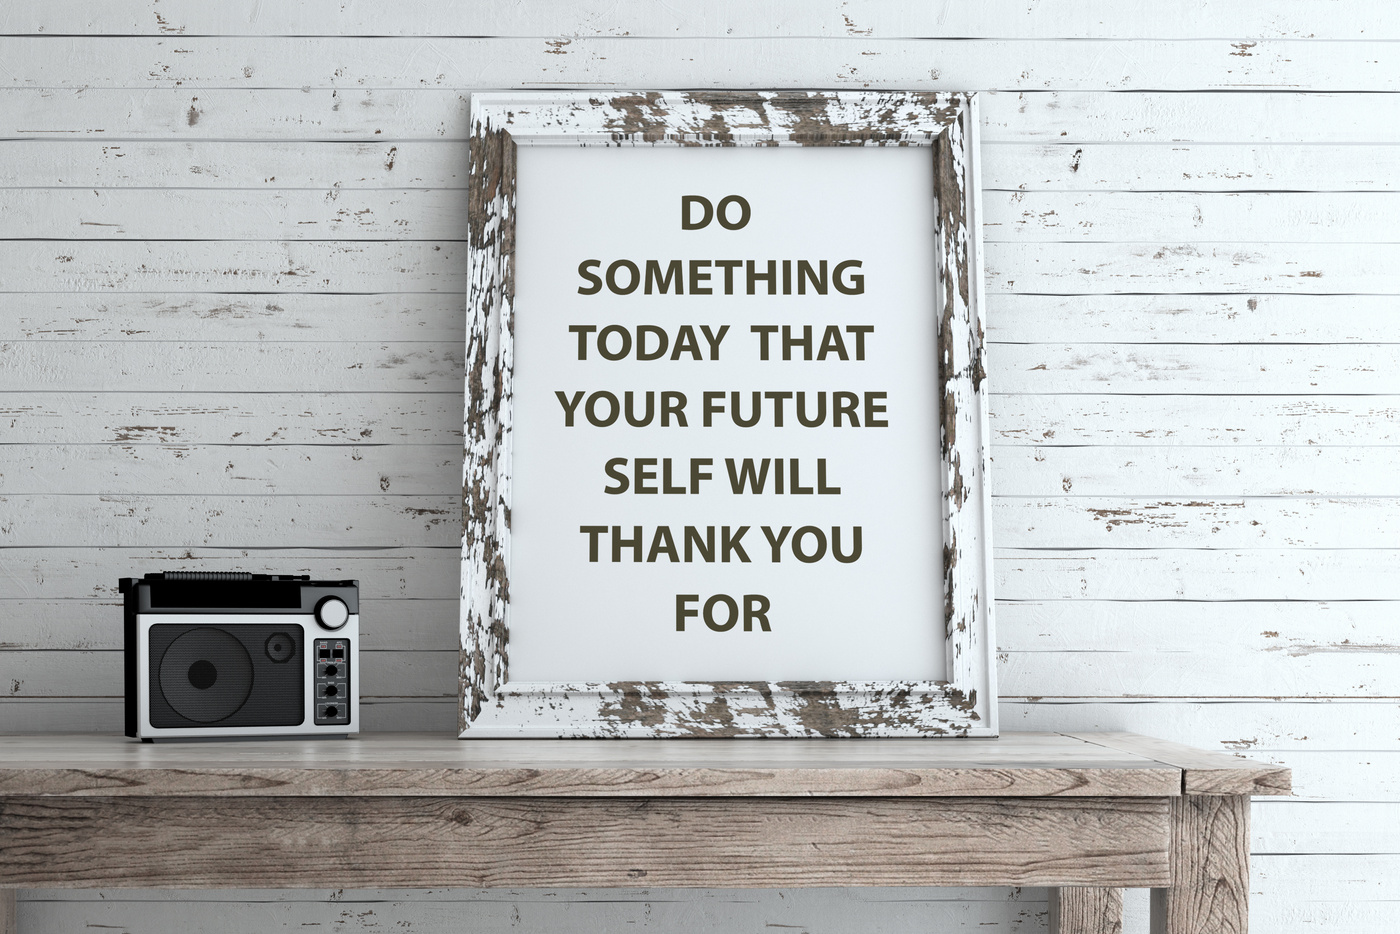 Inspirational Quote on Picture Frame.